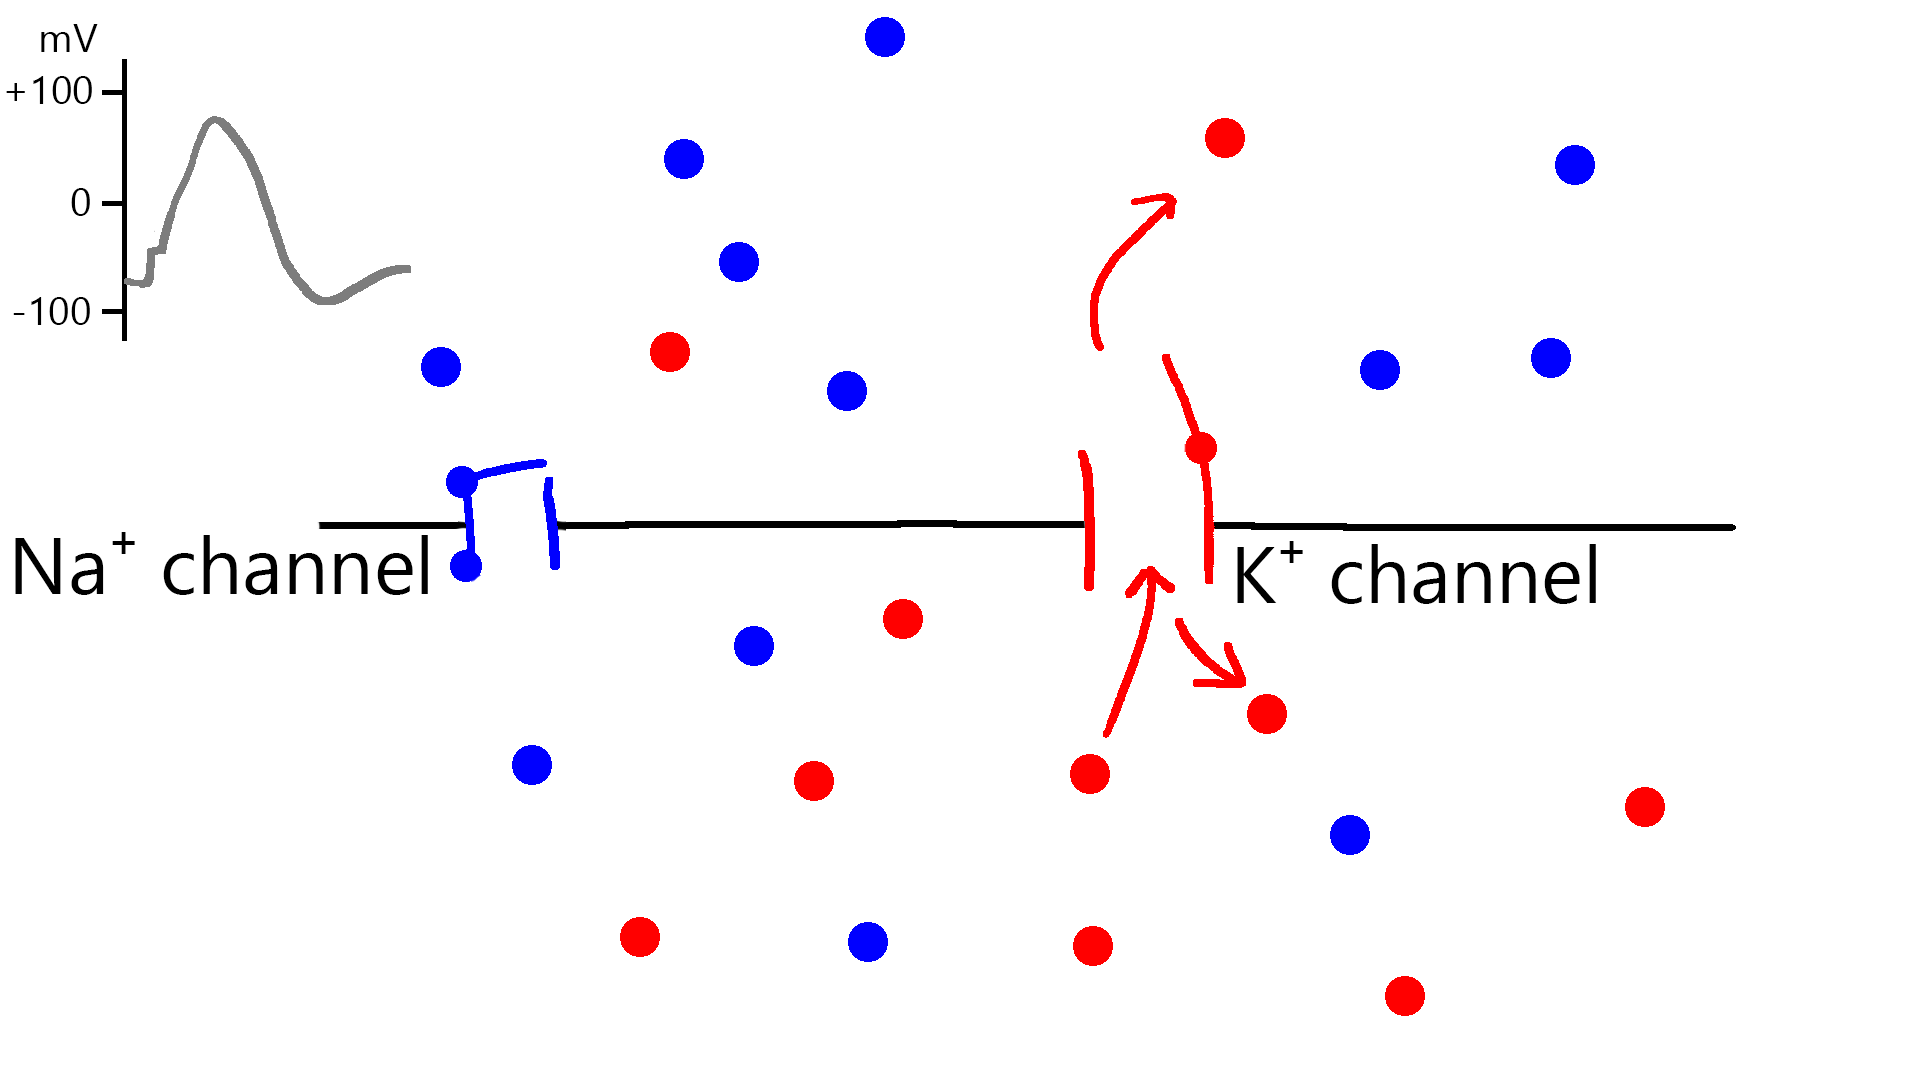  Na⁺ channel is closed. K⁺ has concentrations have leveled off around -73 mV, where K⁺ ions are equally likely to enter and exit the membrane.